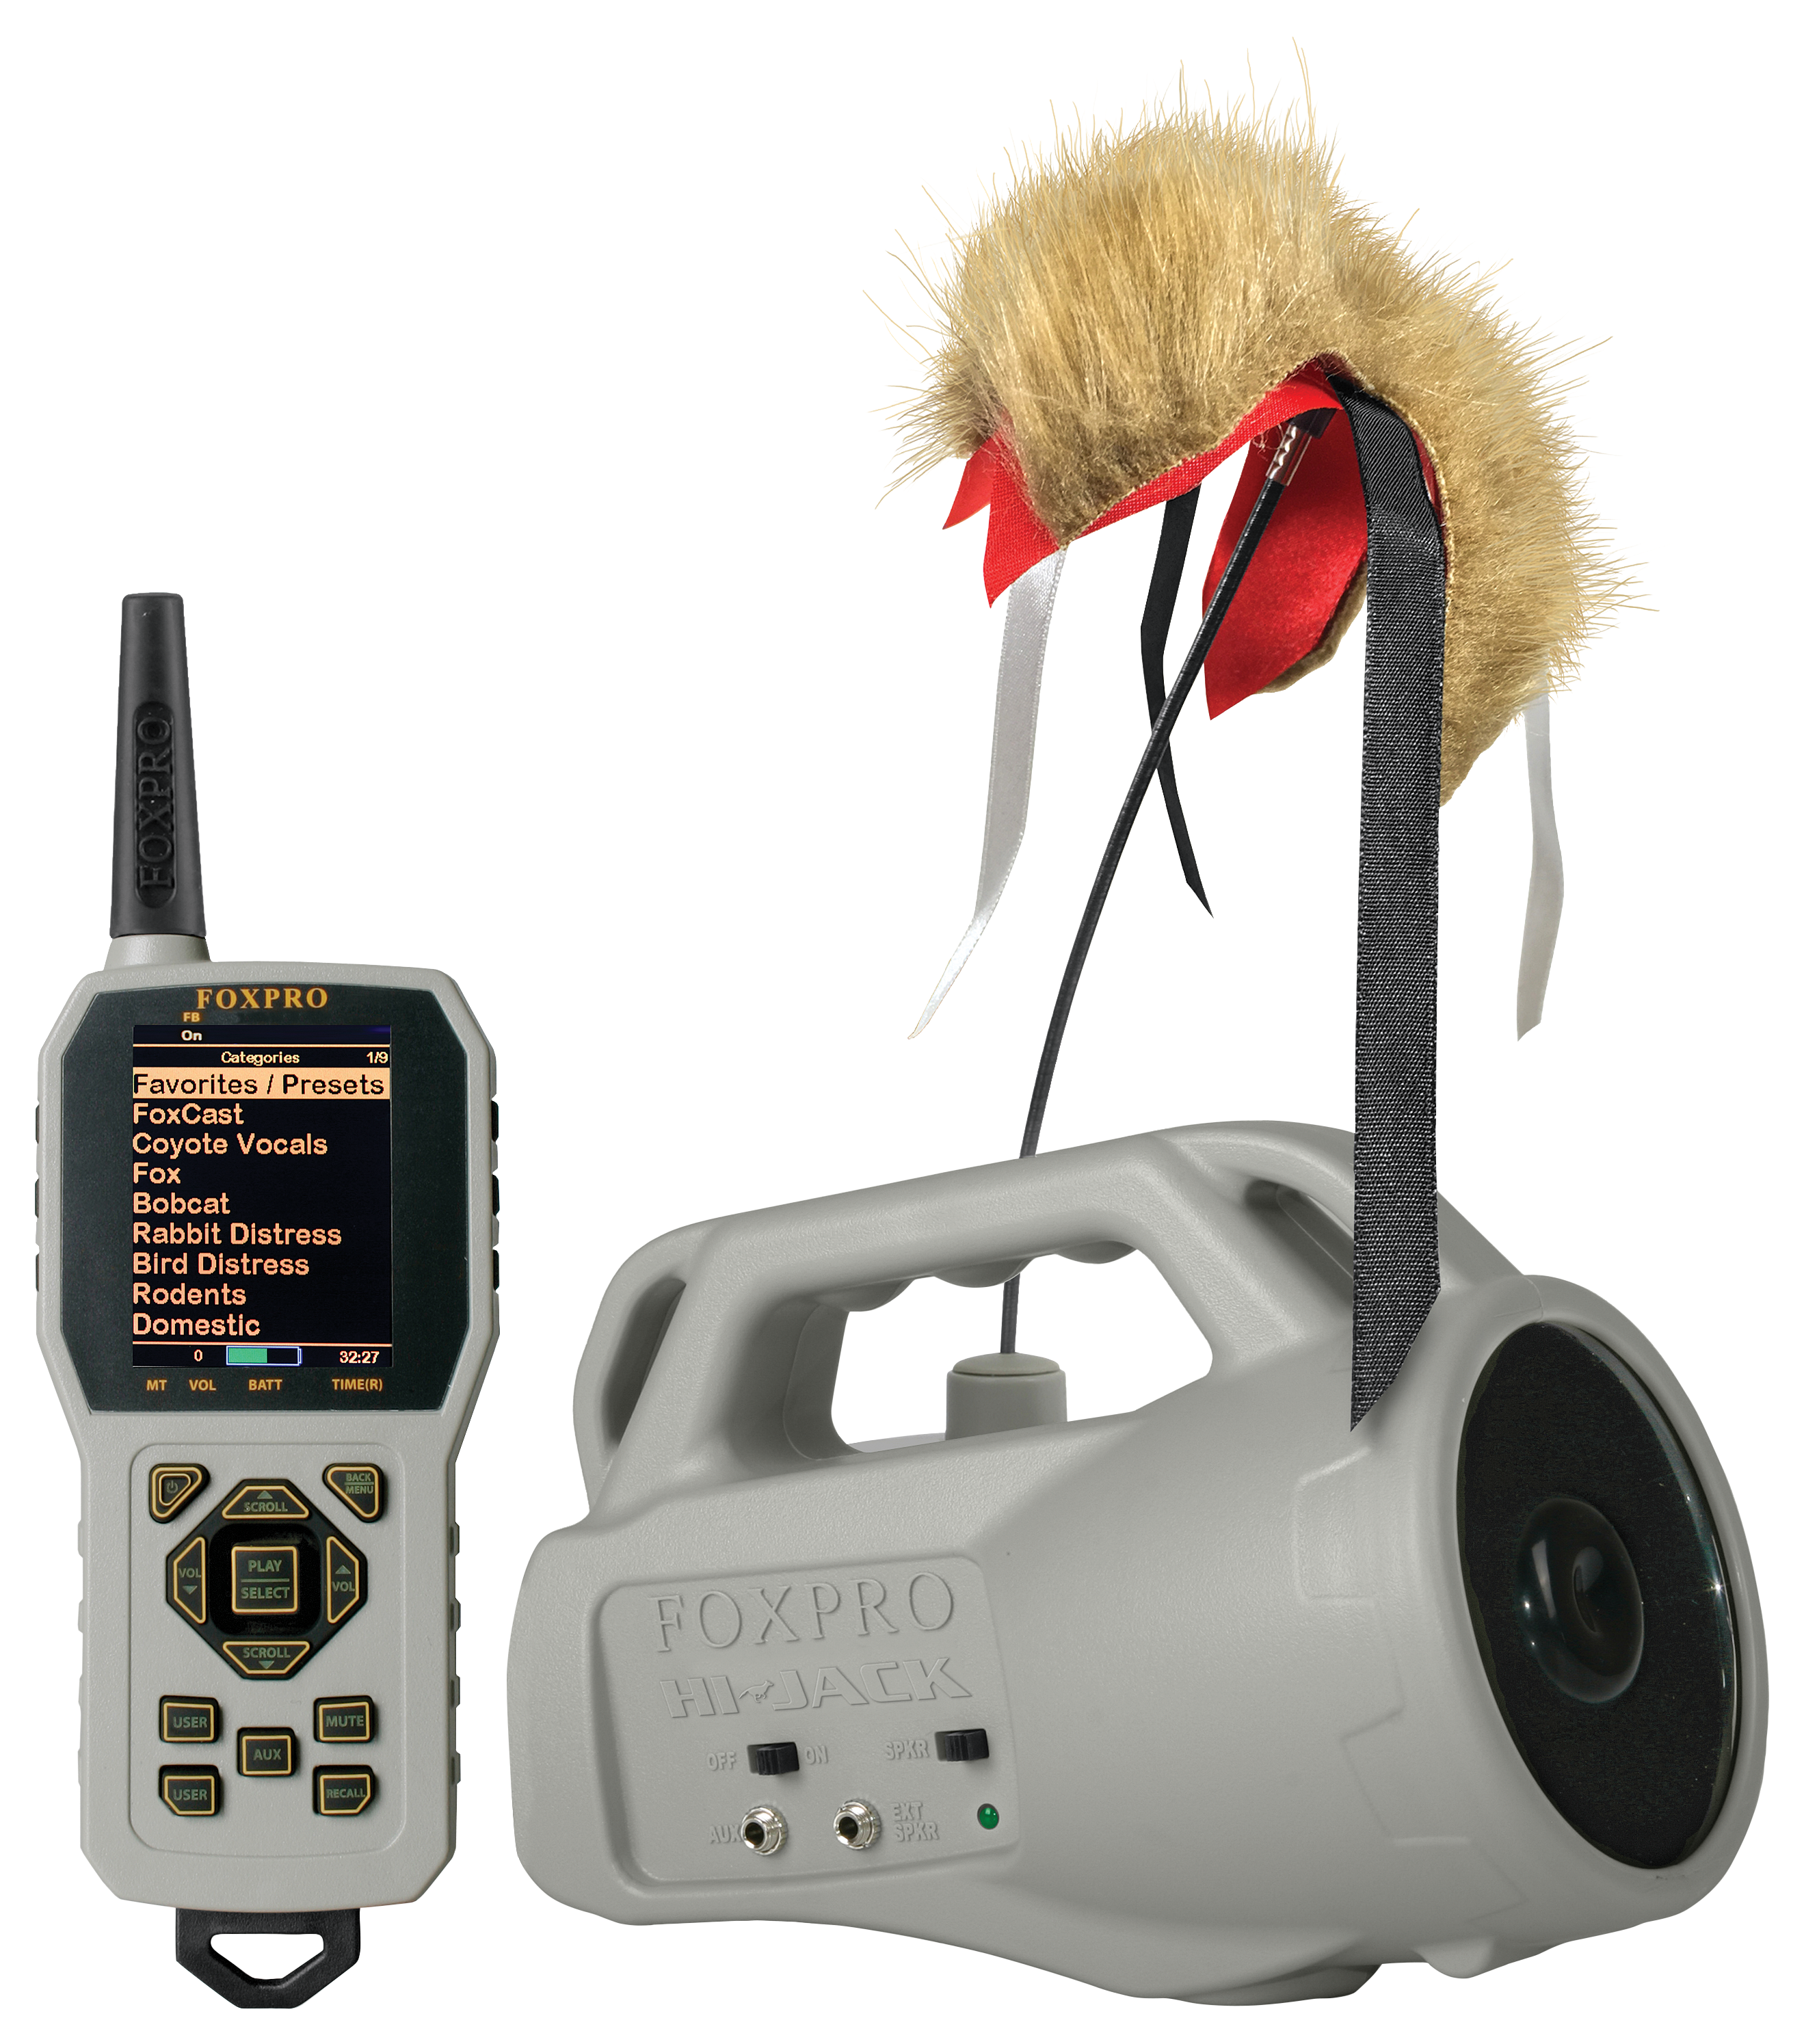 FOXPRO Hi-Jack Electronic Game Call System